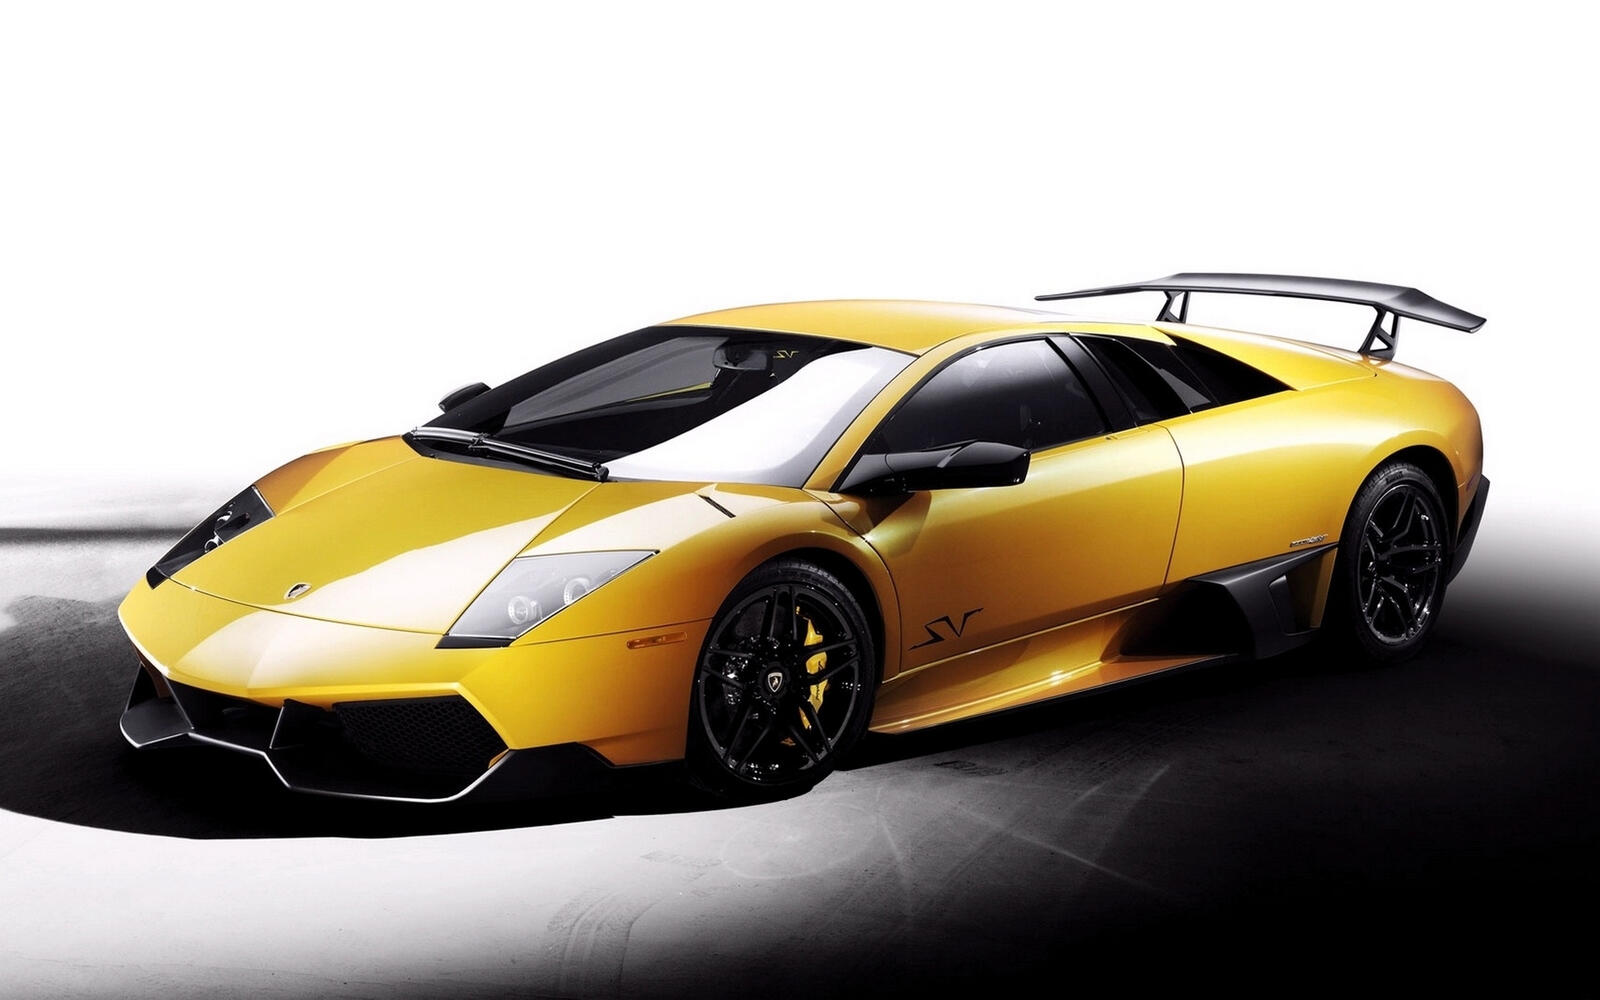 Wallpapers sports car yellow cars on the desktop